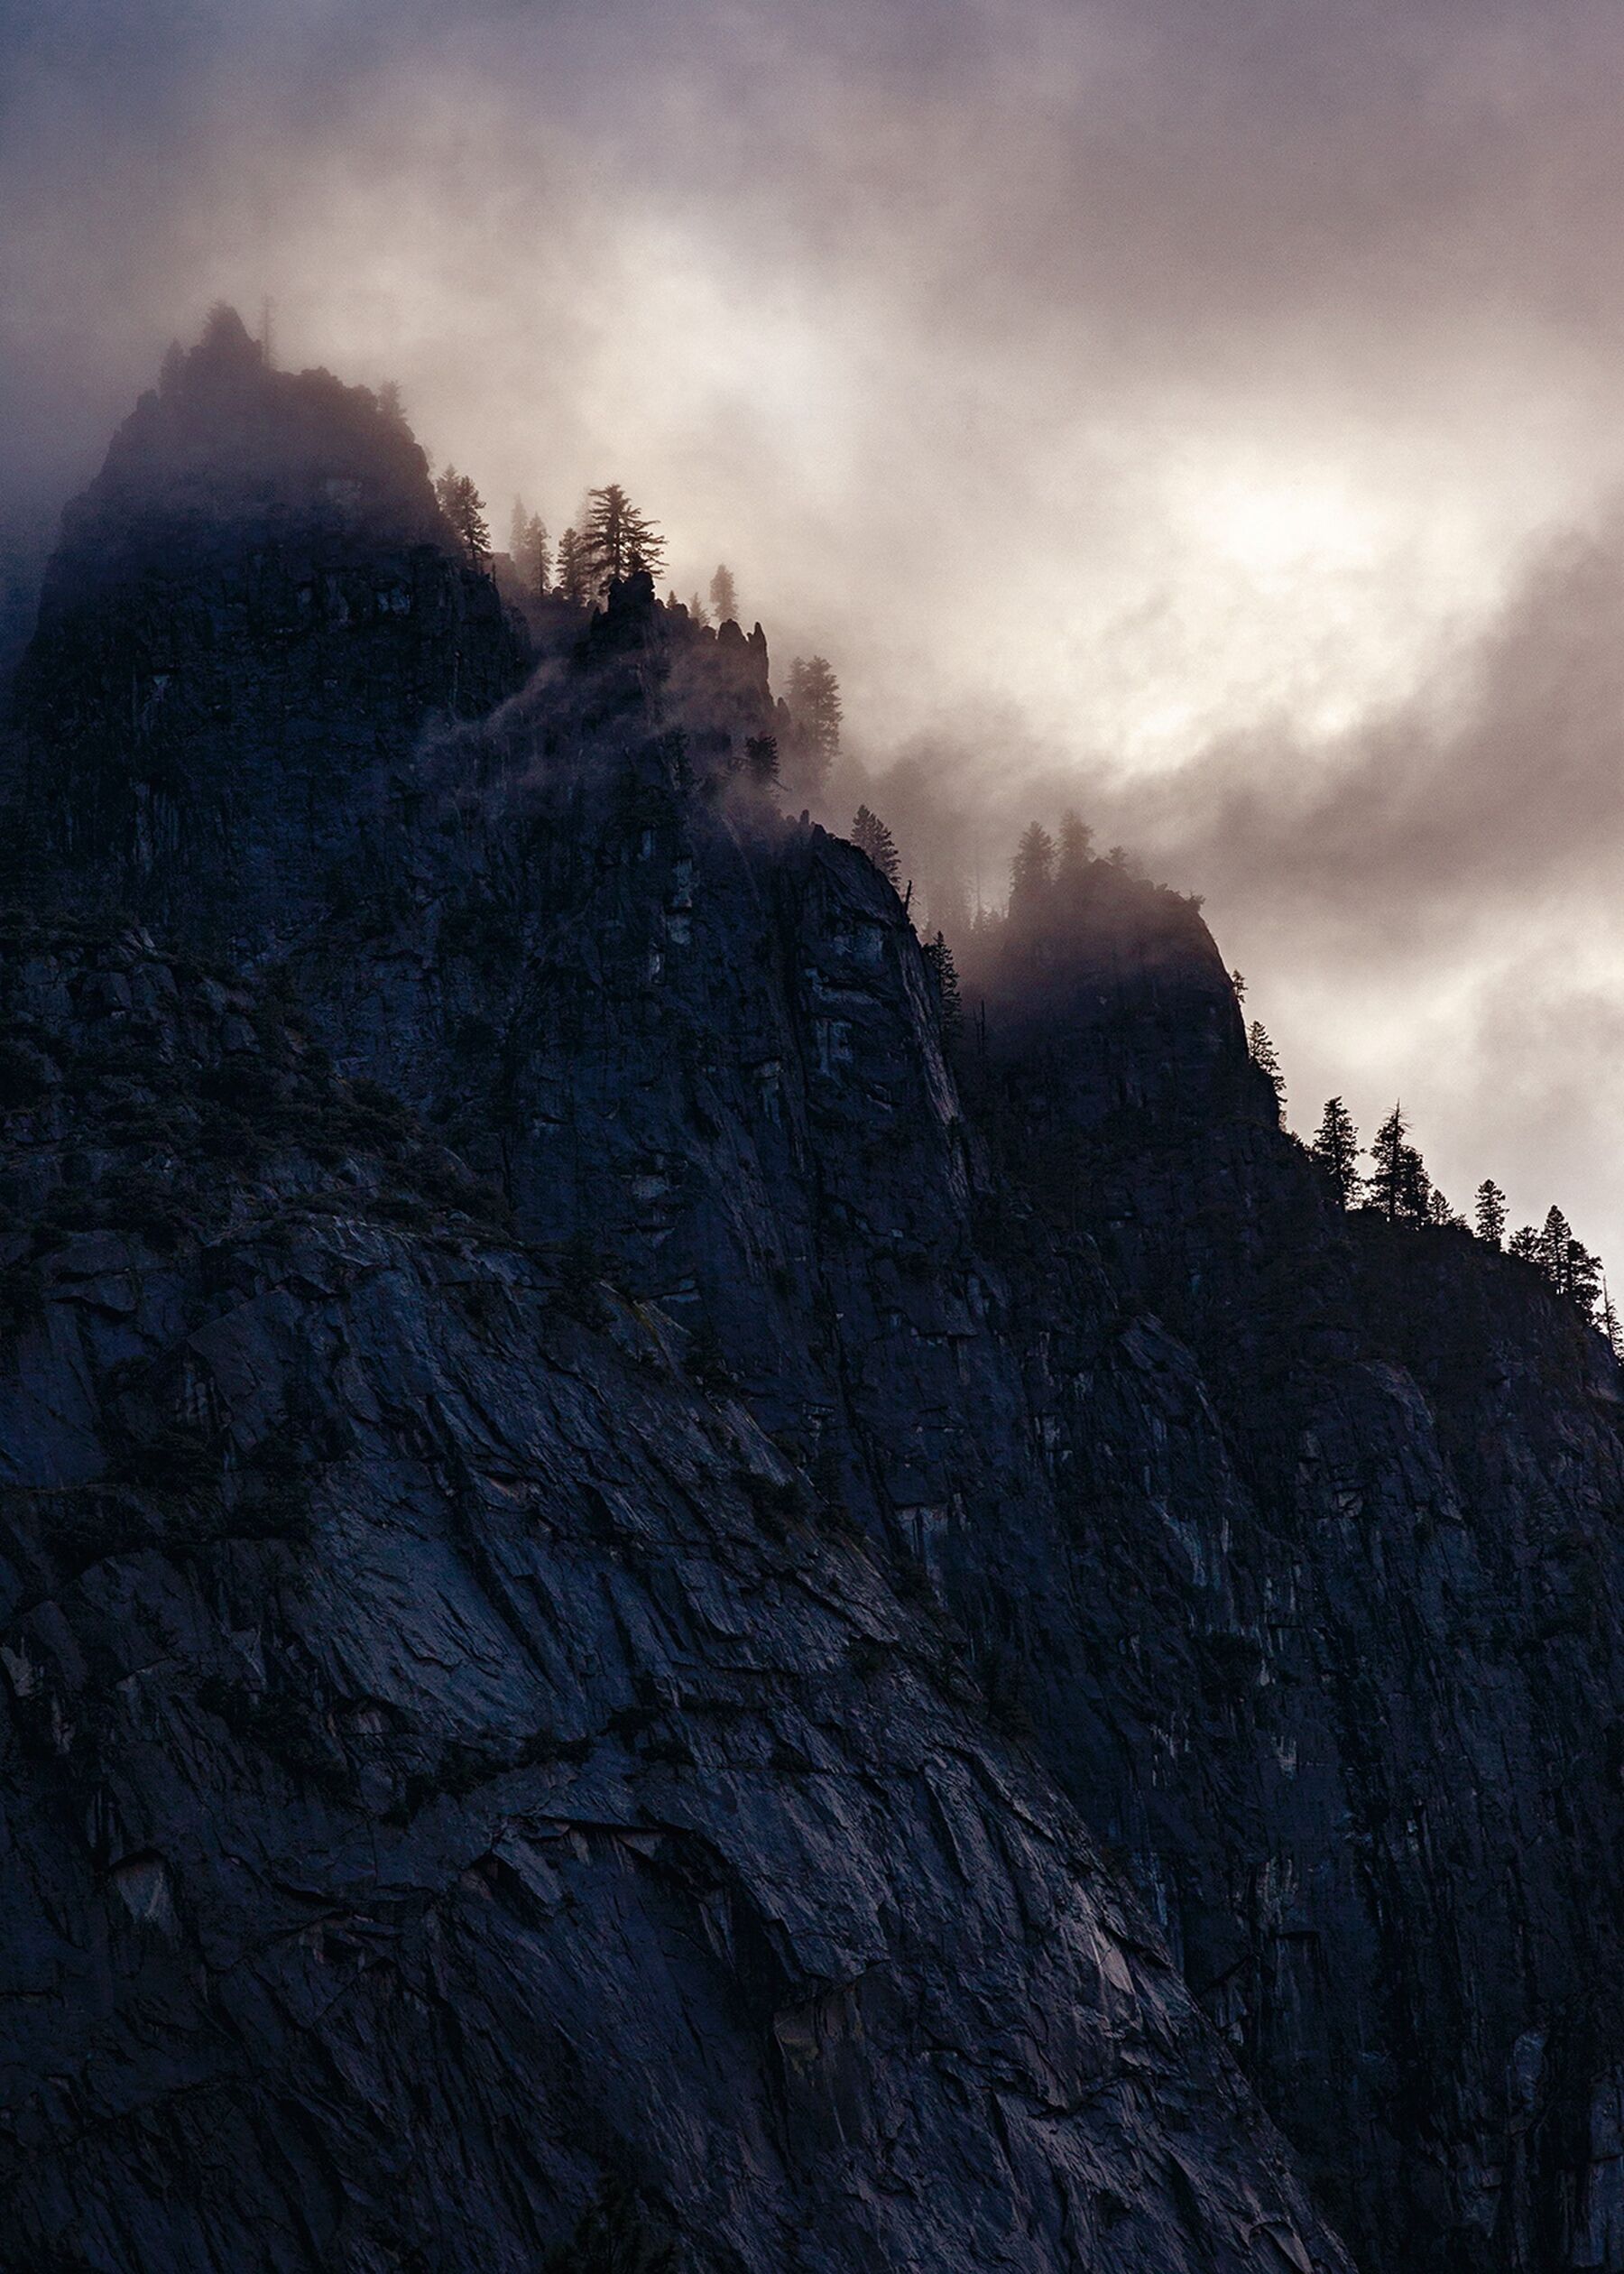 A dark, cloudy sky hovers over the silhouette of a tree-topped cliff in Yosemite National Park, California